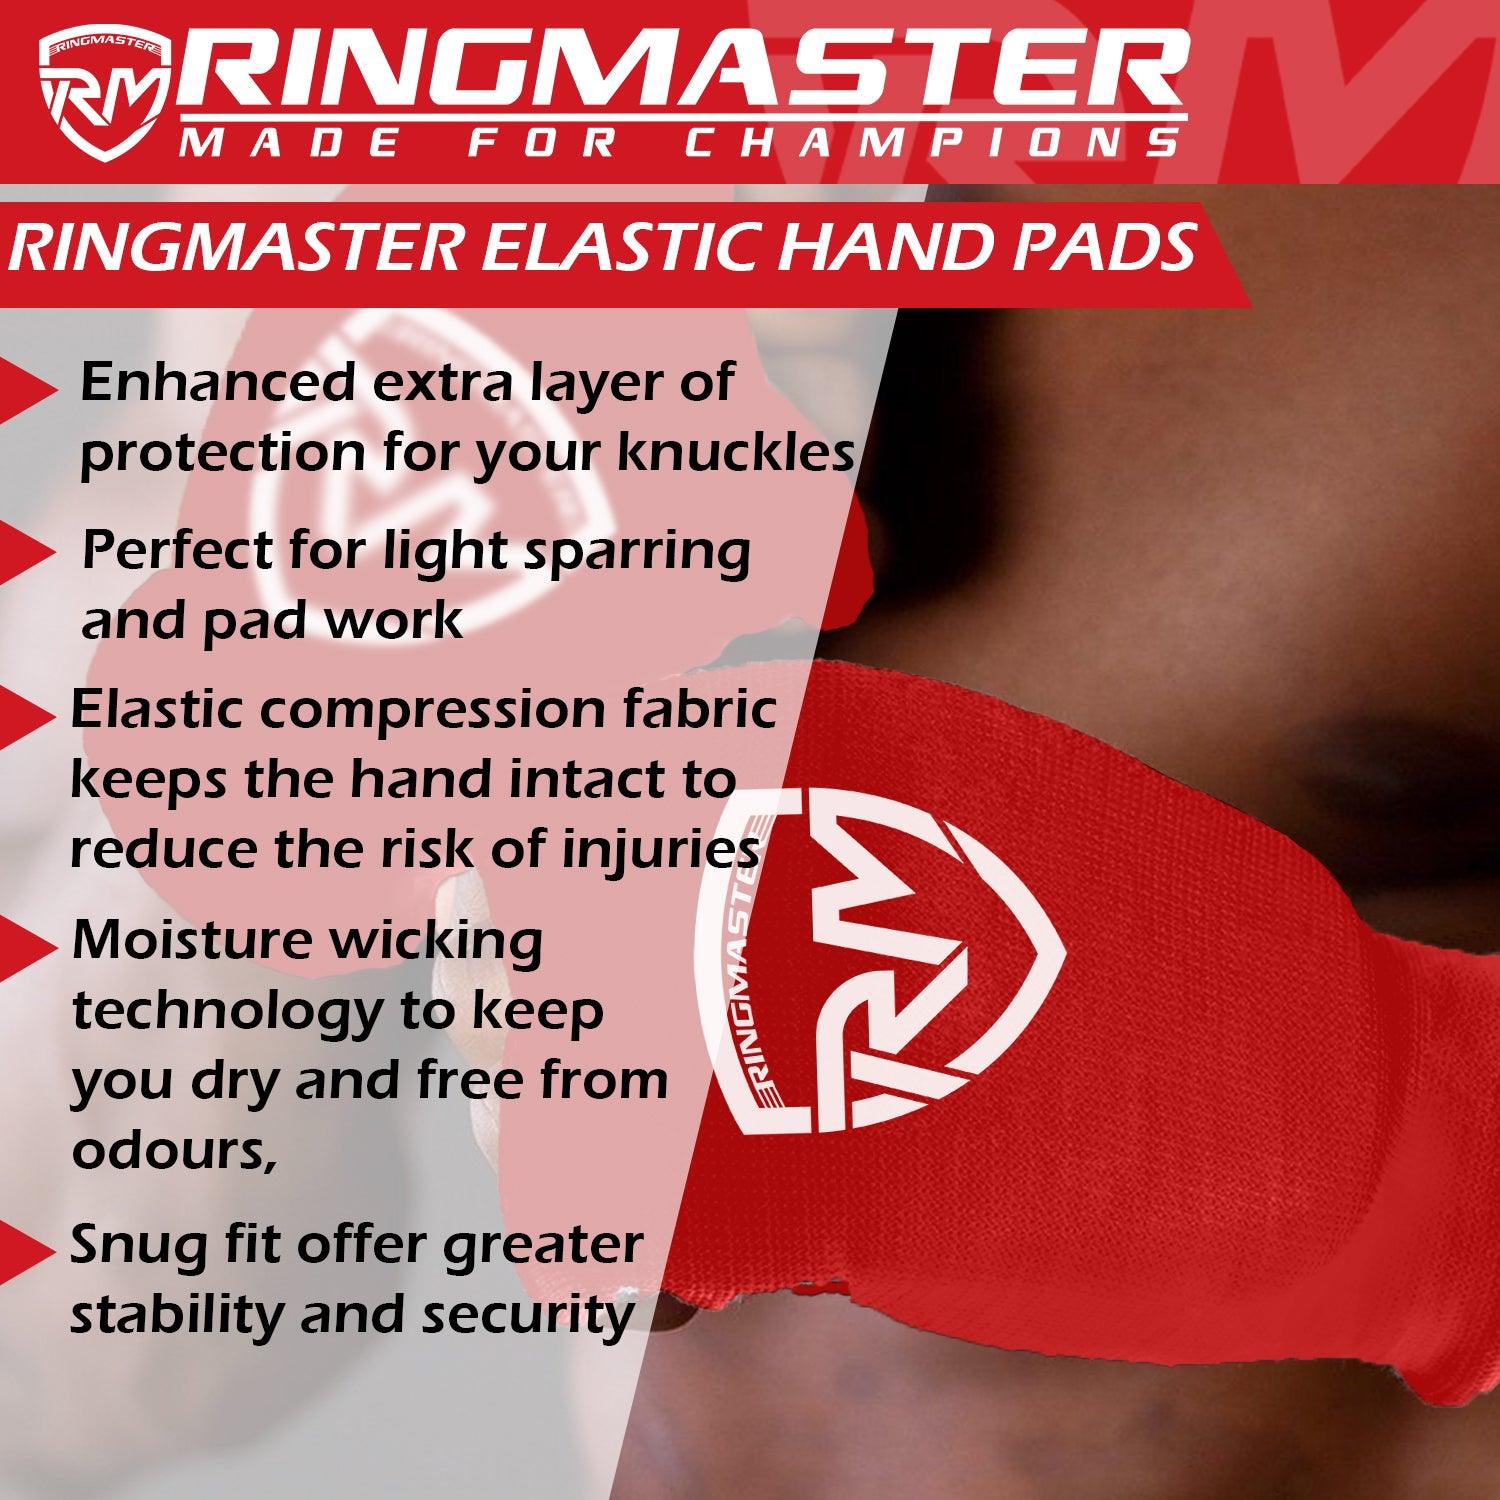 RingMaster Sports Slip on Elastic Hand Pads Mitts Red - RINGMASTER SPORTS - Made For Champions